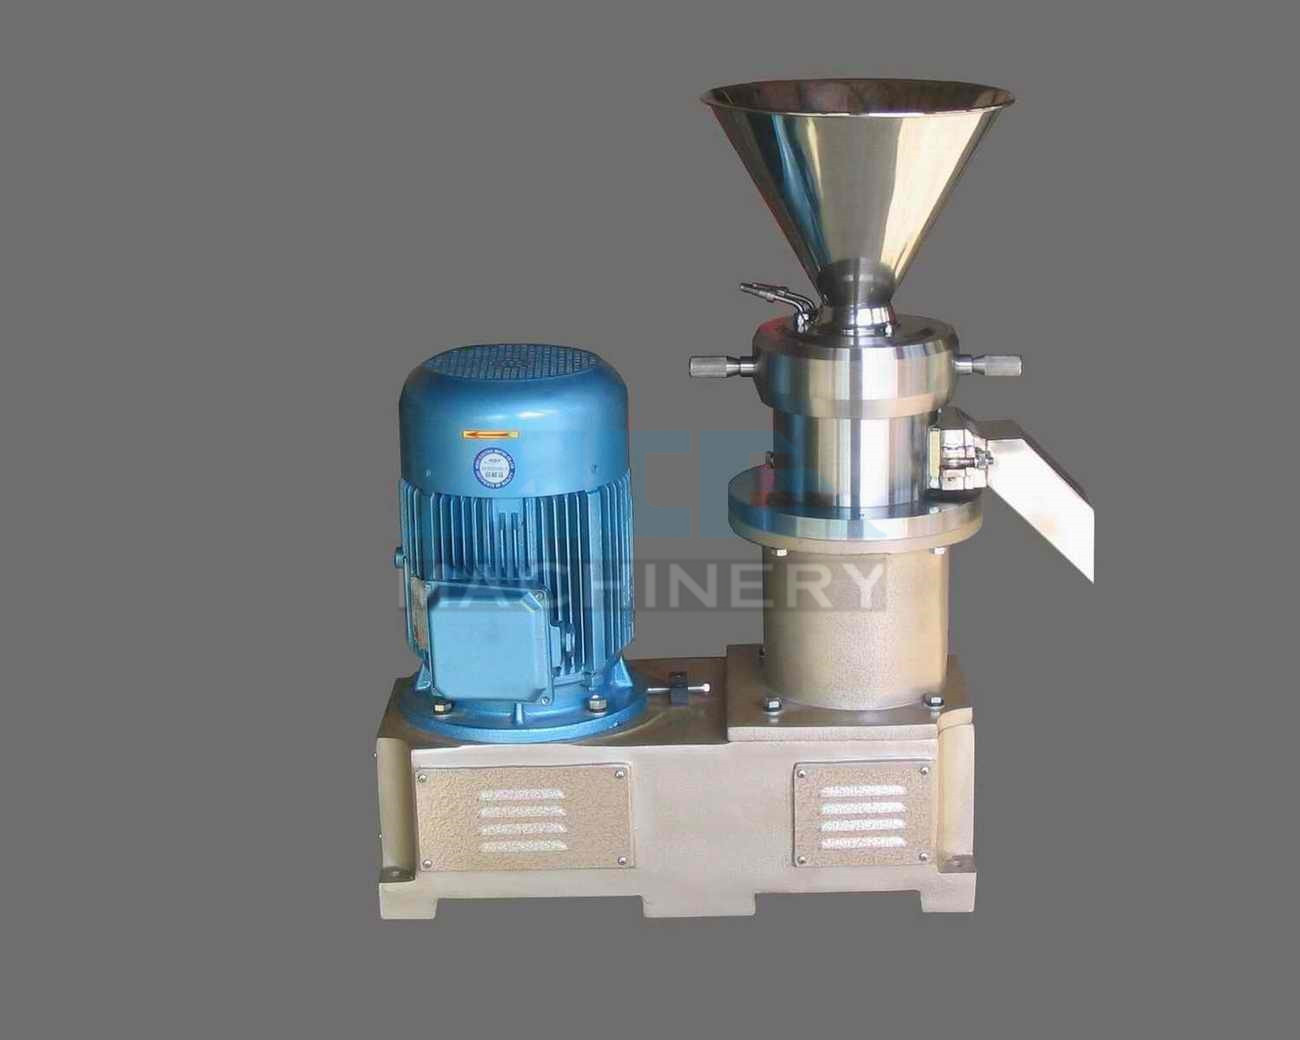 Quality ss304 316L food grade sanitary grinding machine colloid mill Horizontal colloid mill stainless steel for sale for sale